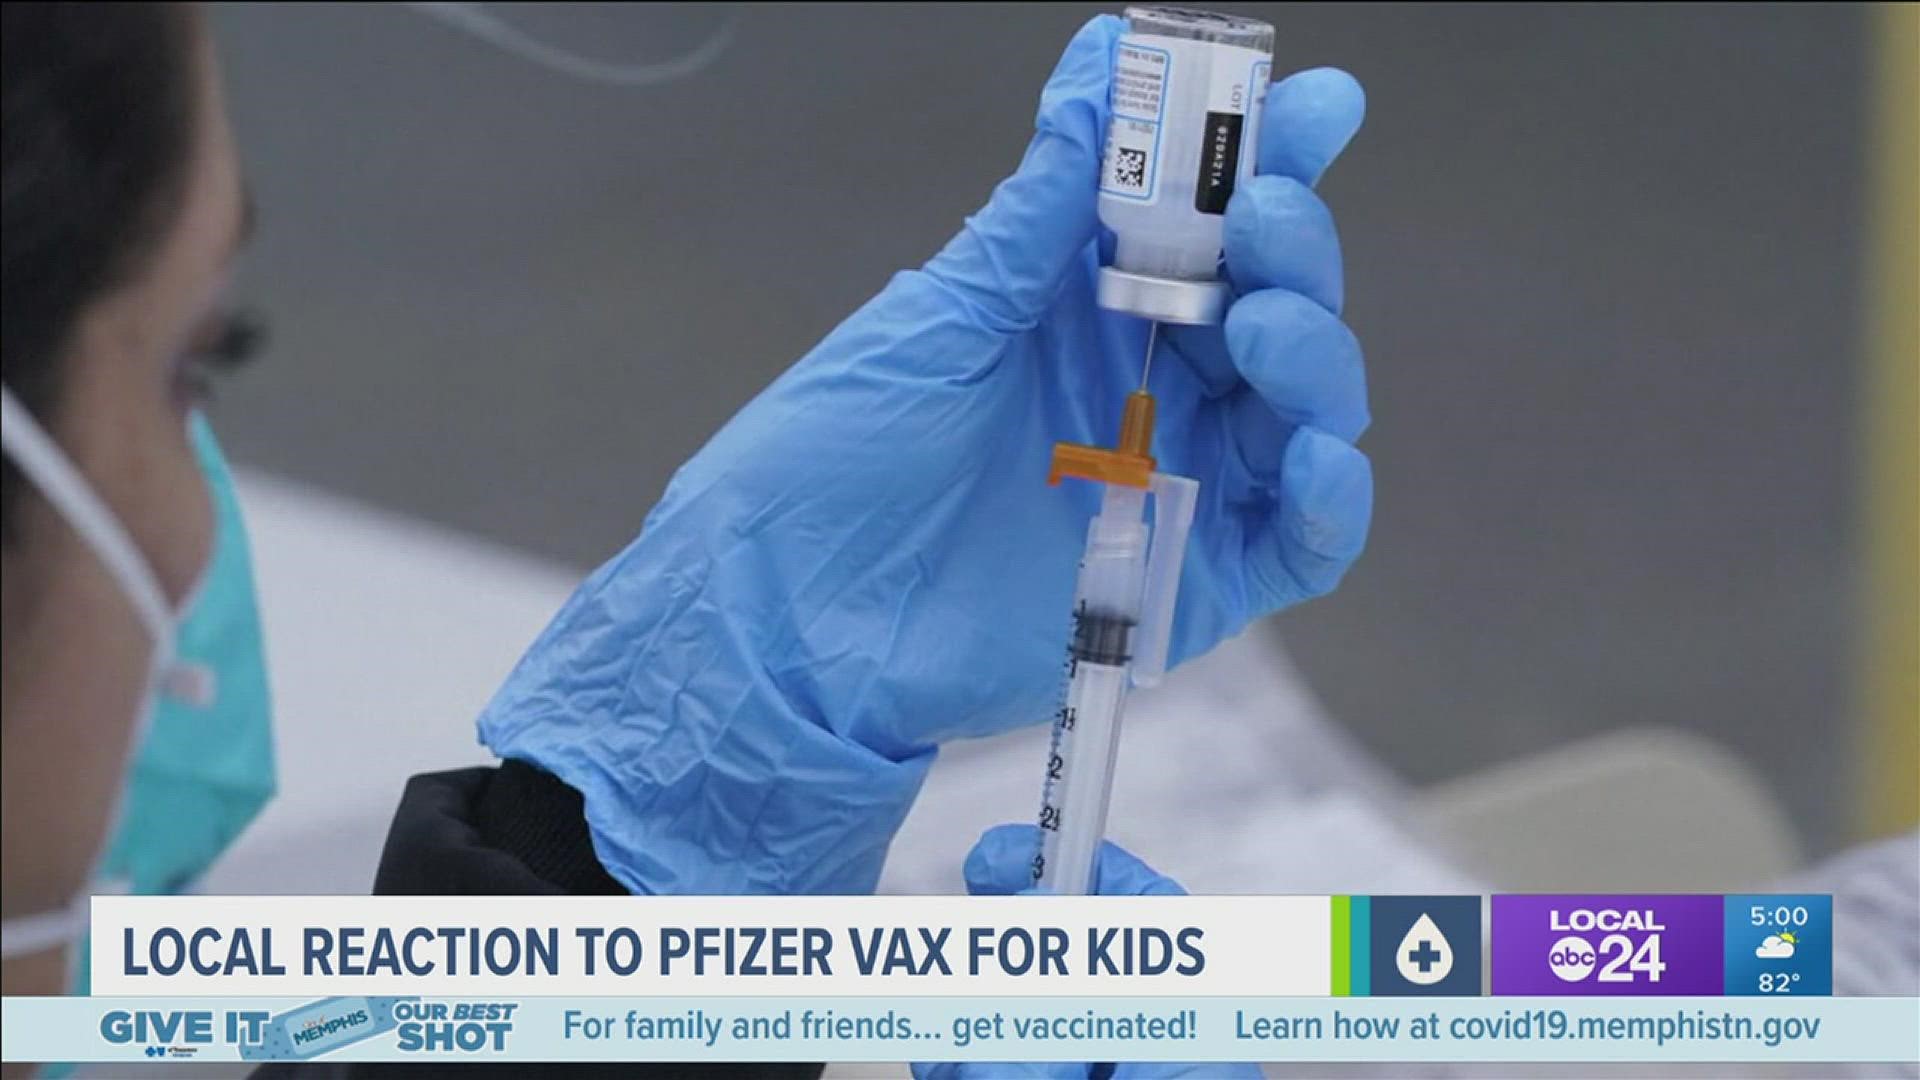 If the FDA approves vaccine for that age group by end of year, more school children would become eligible. But challenges remain getting more parents convinced.